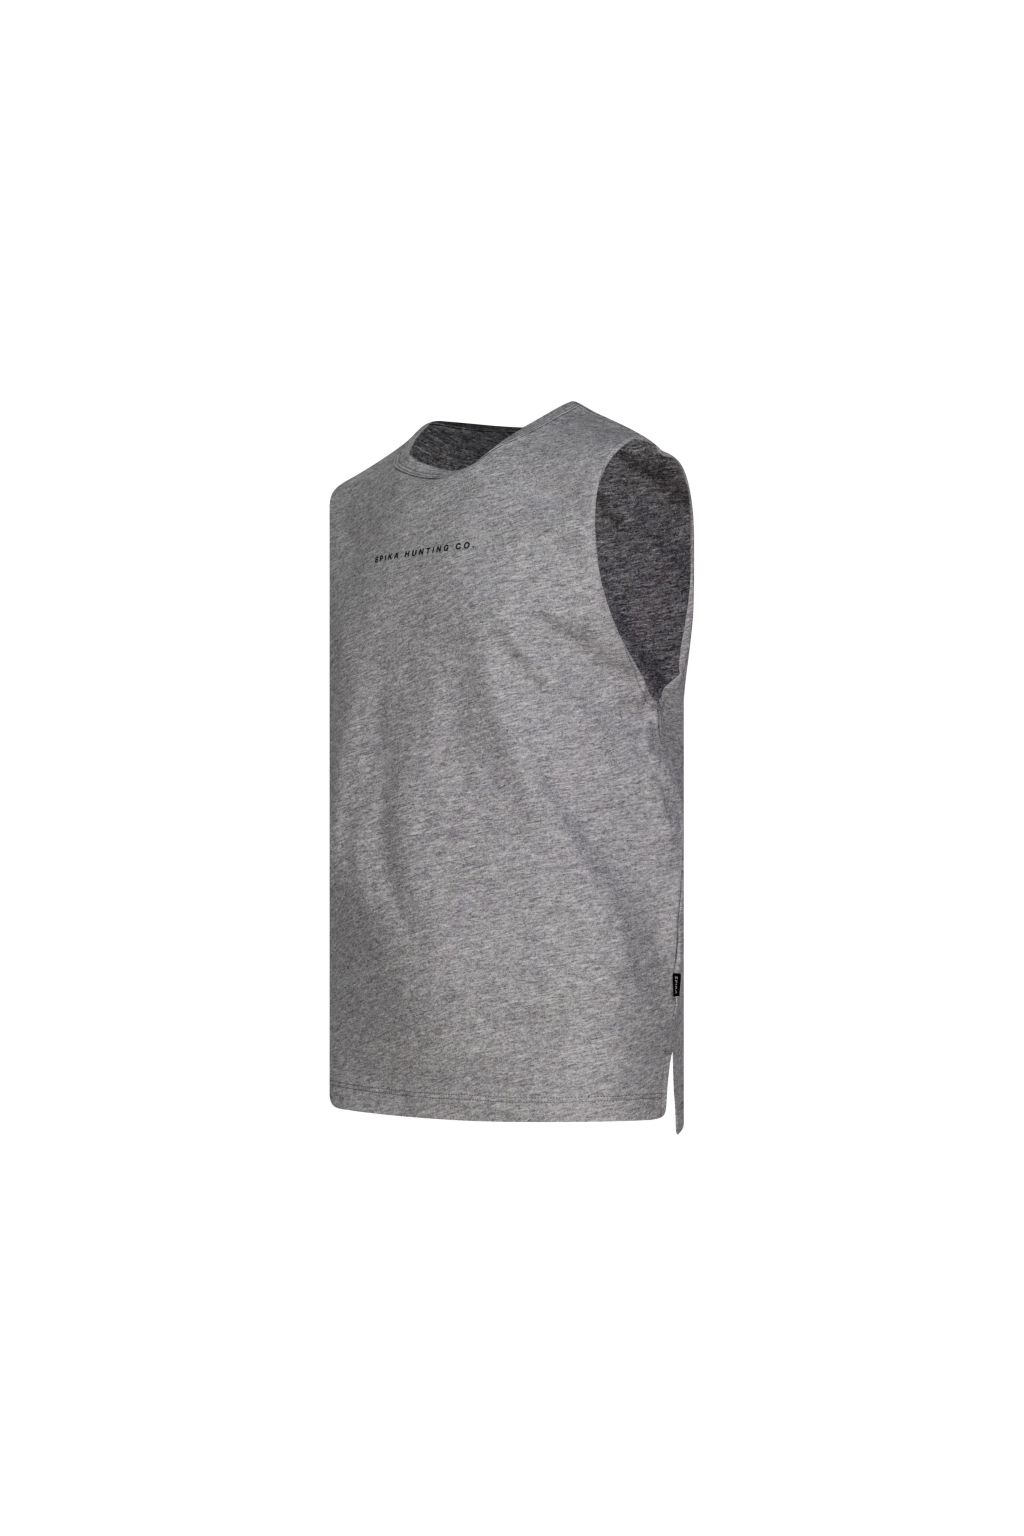 Spika GO Classic Kids Singlet - Grey - 2 - Mansfield Hunting & Fishing - Products to prepare for Corona Virus